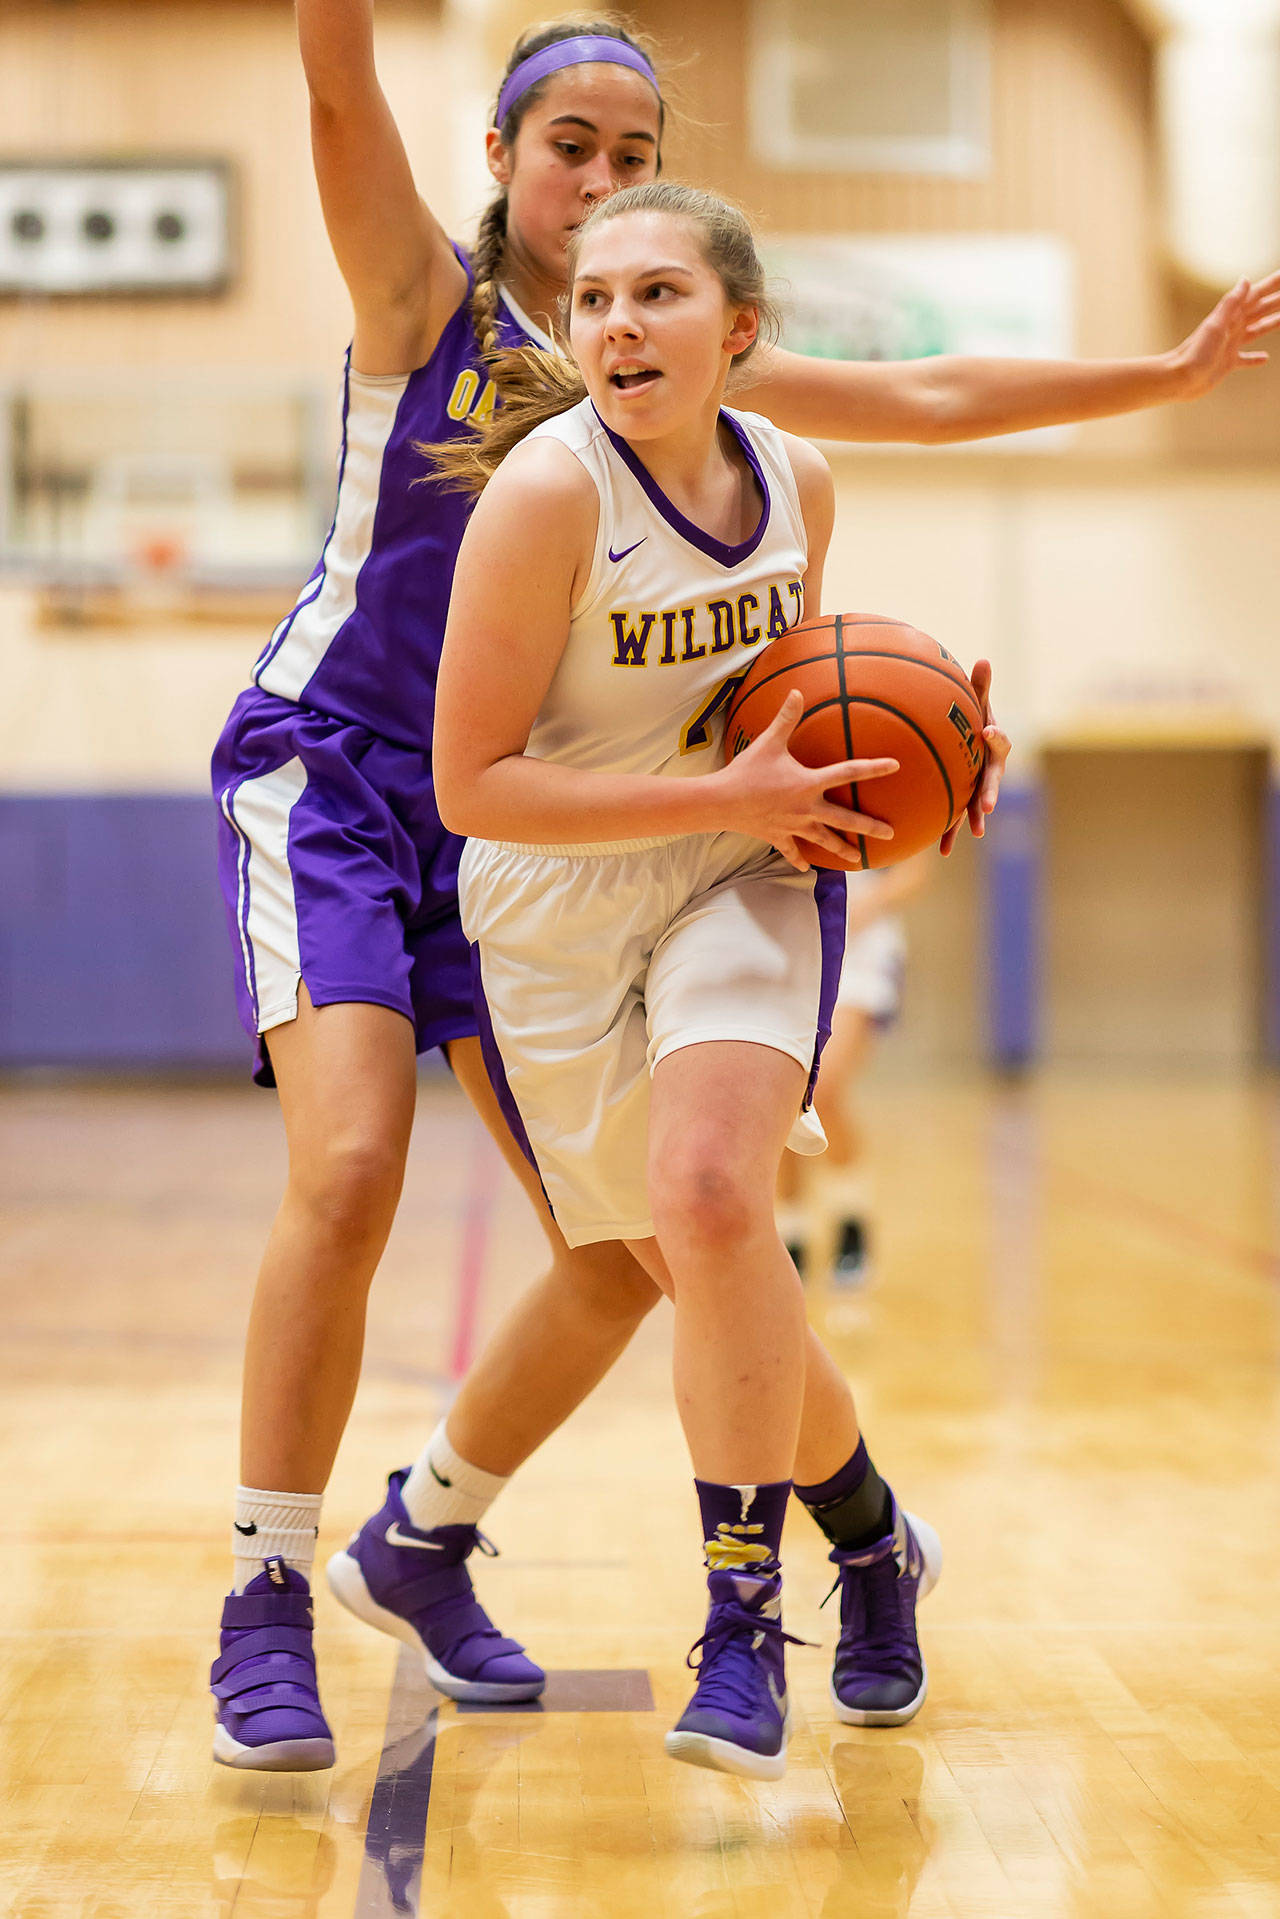 Photos: Wildcats display talents in annual scrimmage / Boys, girls basketball